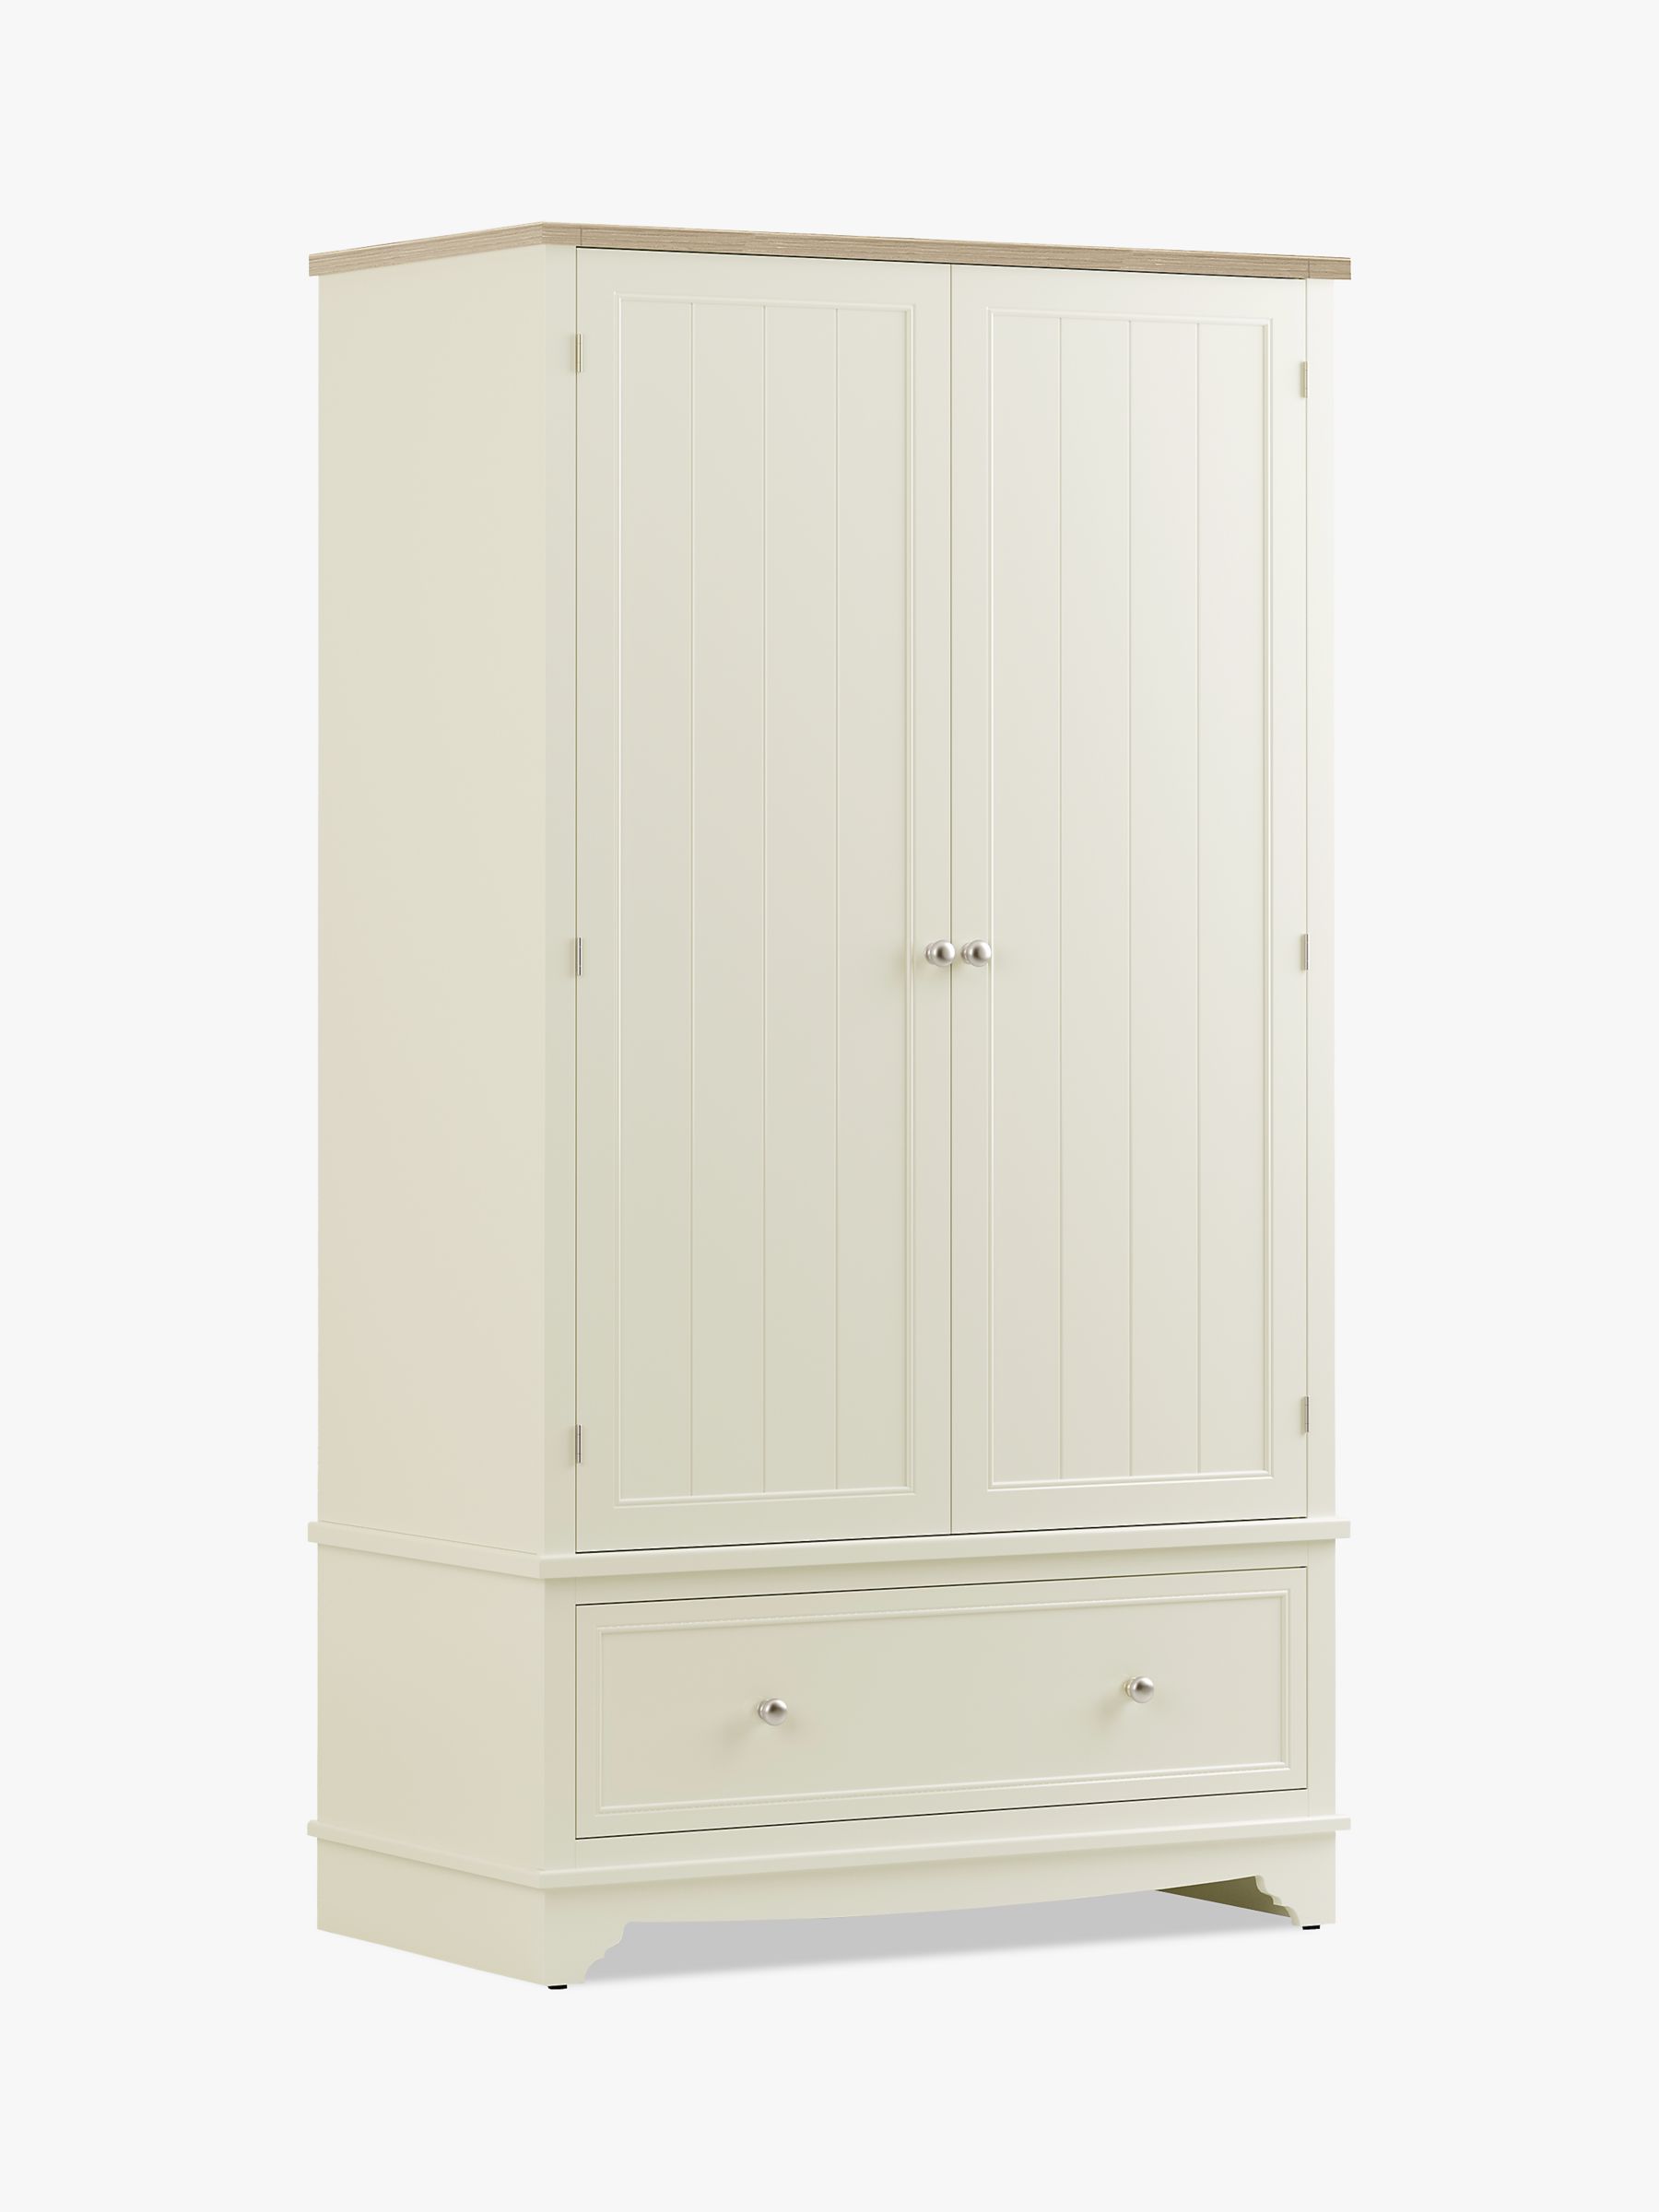 Photo of John lewis st ives double wardrobe with 1 drawer